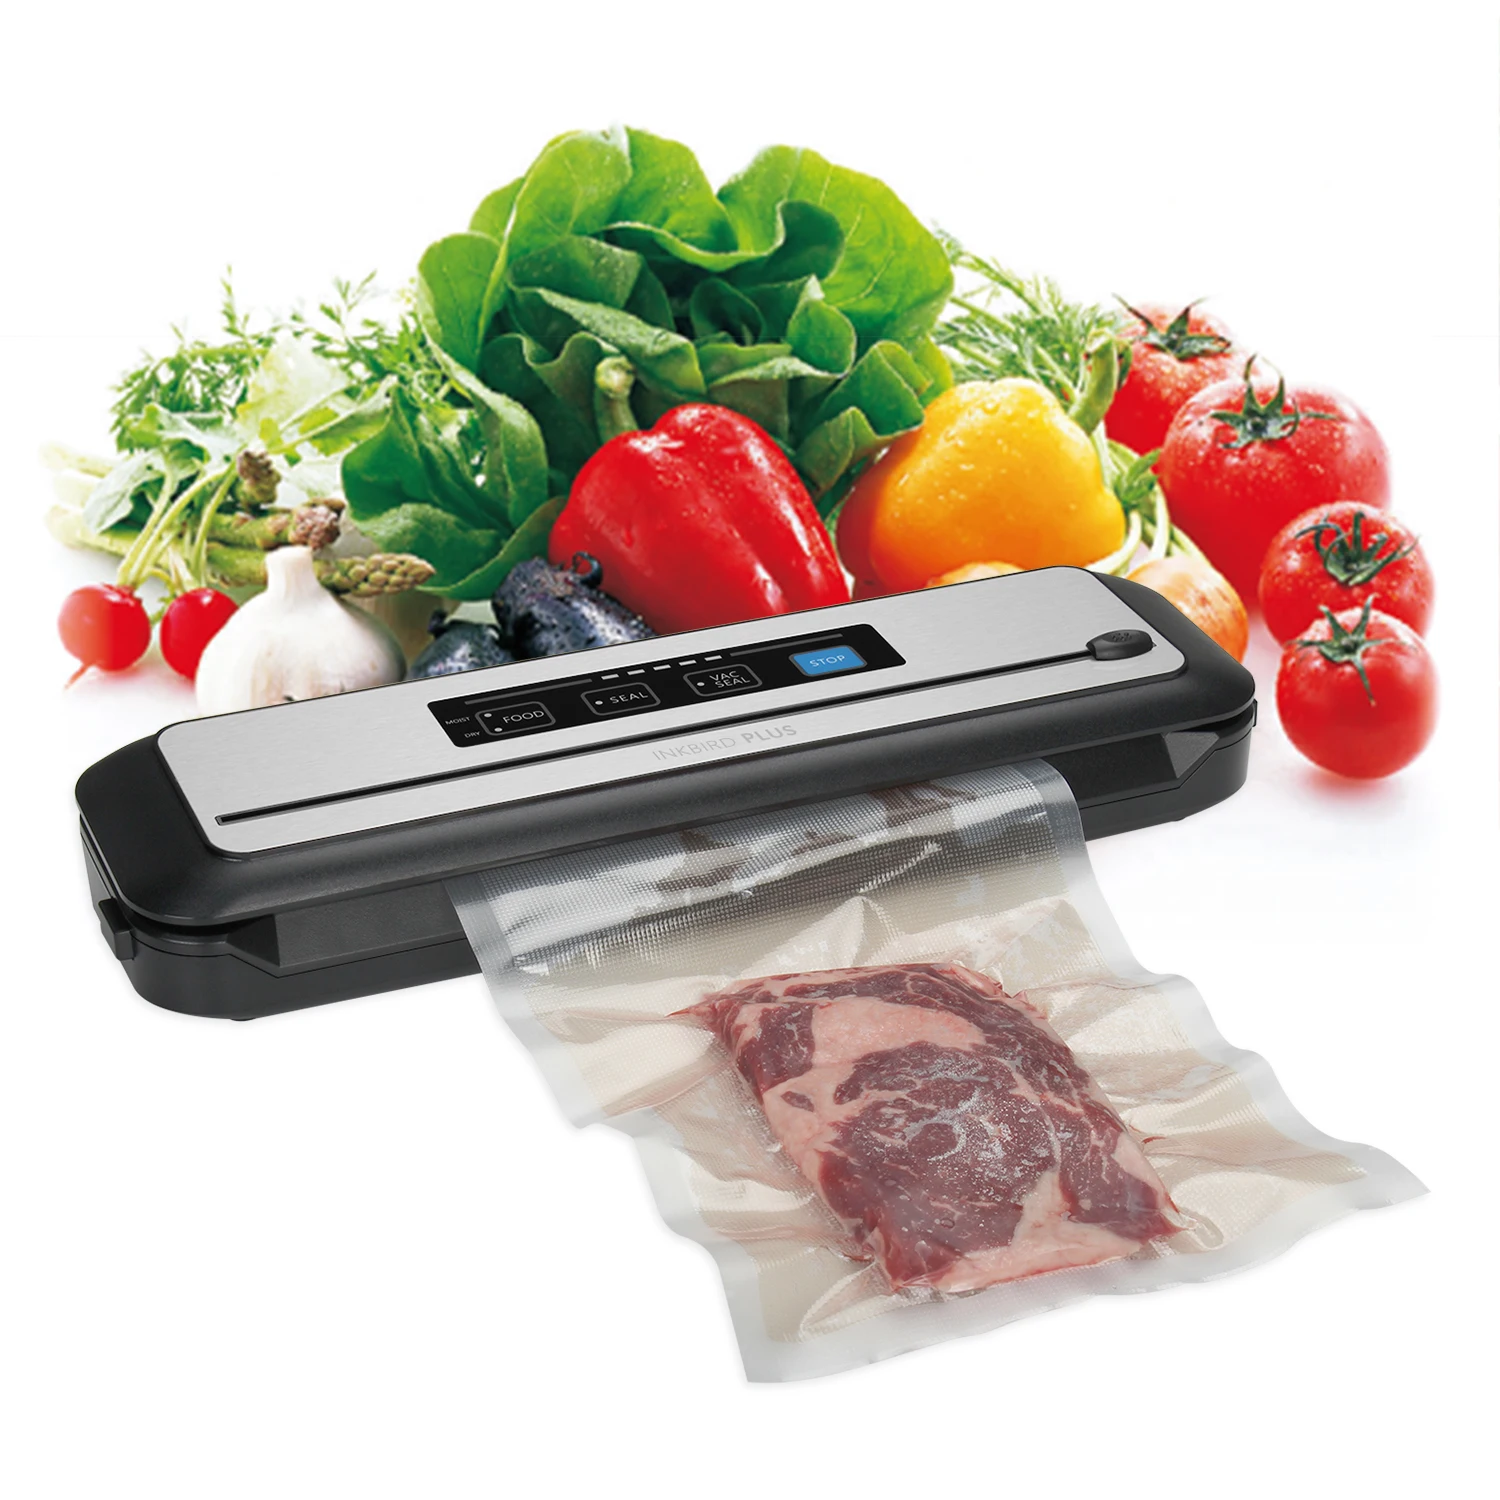 INKBIRD INK-VS01 Vacuum Sealer Best Automatic Sealing Machine for Food Preservation with Dry&Moist Modes Built-in Cutter involly v63l food vacuum sealer 300mm sealing width 6 function modes built in cutter roll film bracket